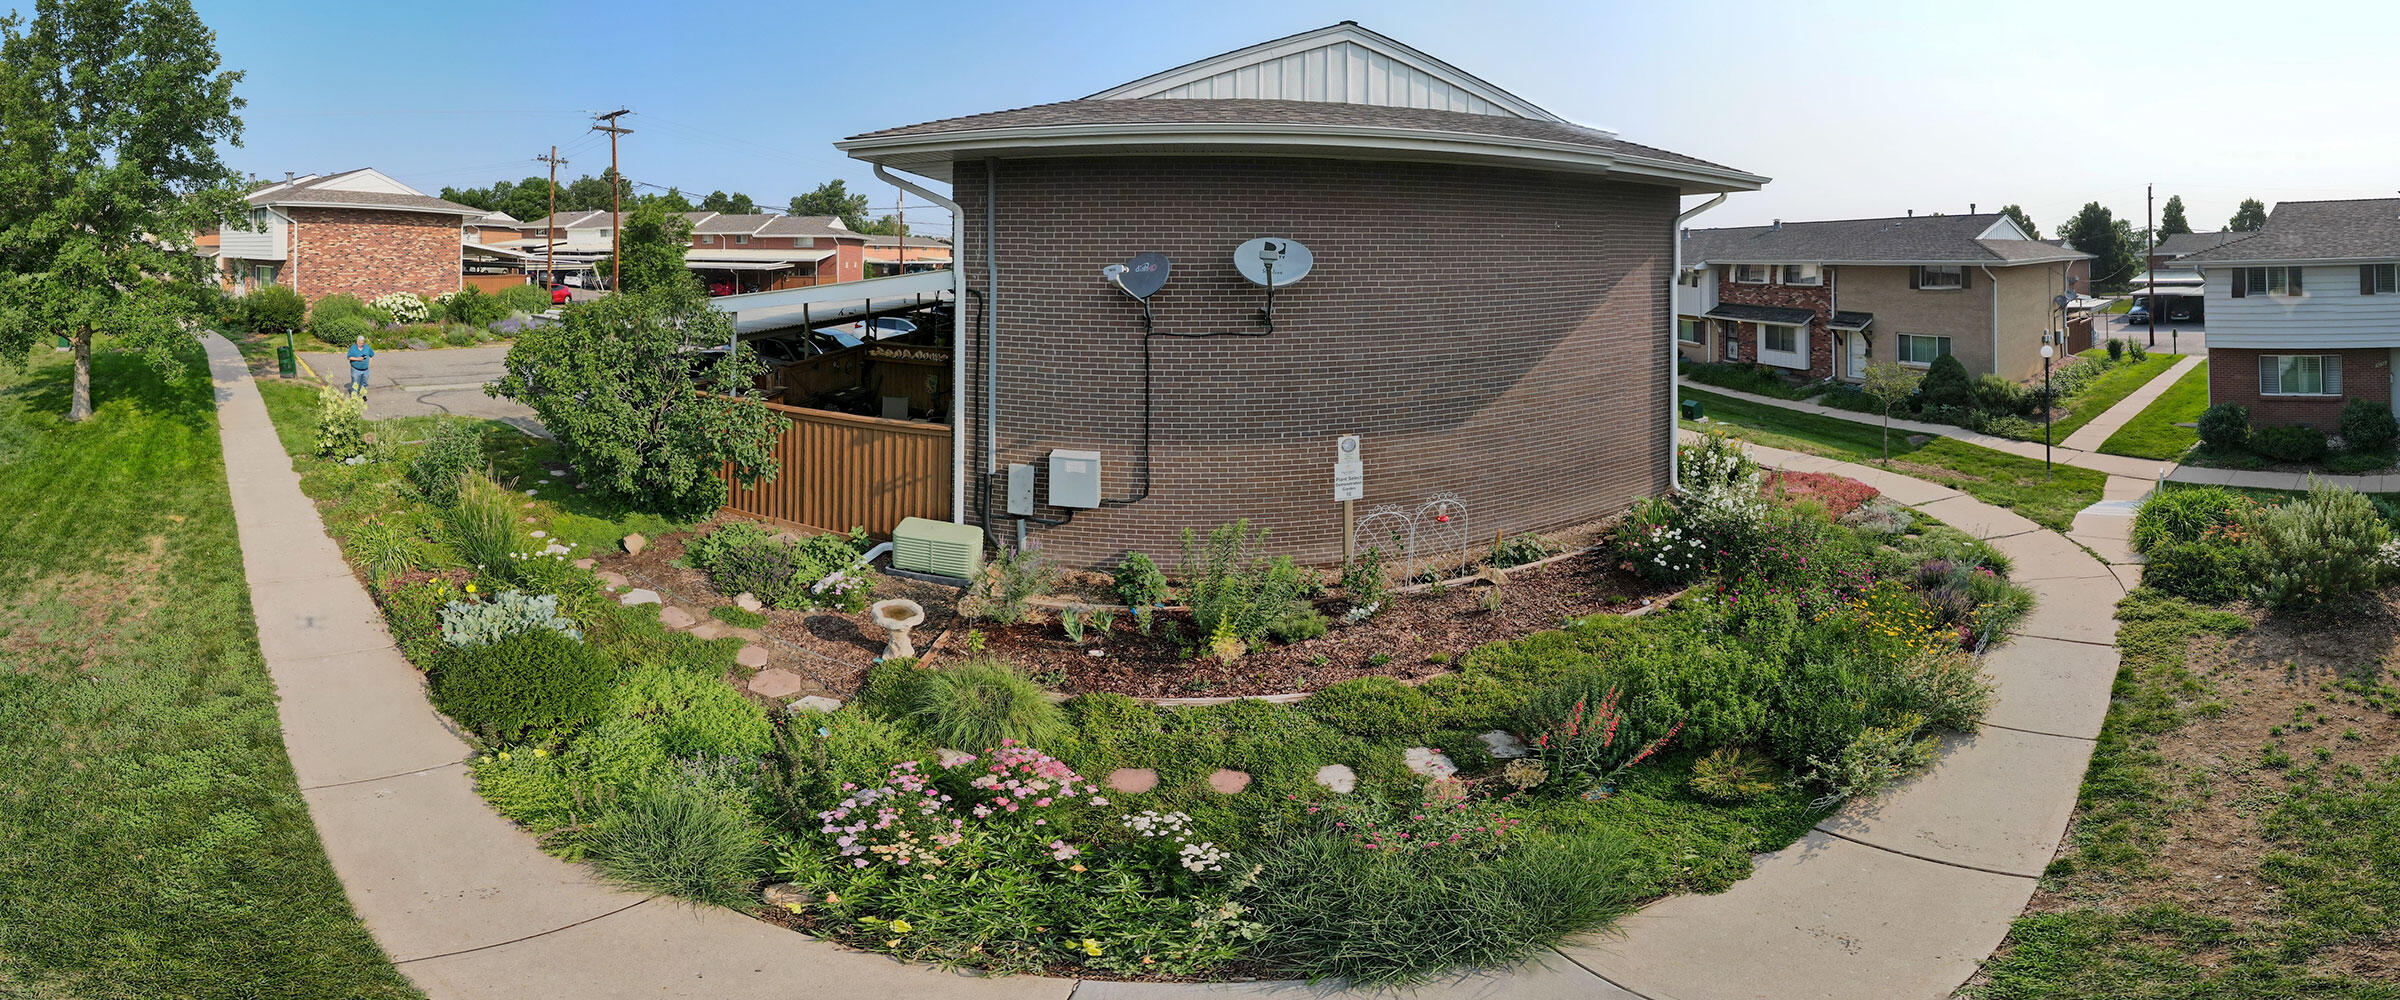 Panorama of a garden of flowers in front of a condo.